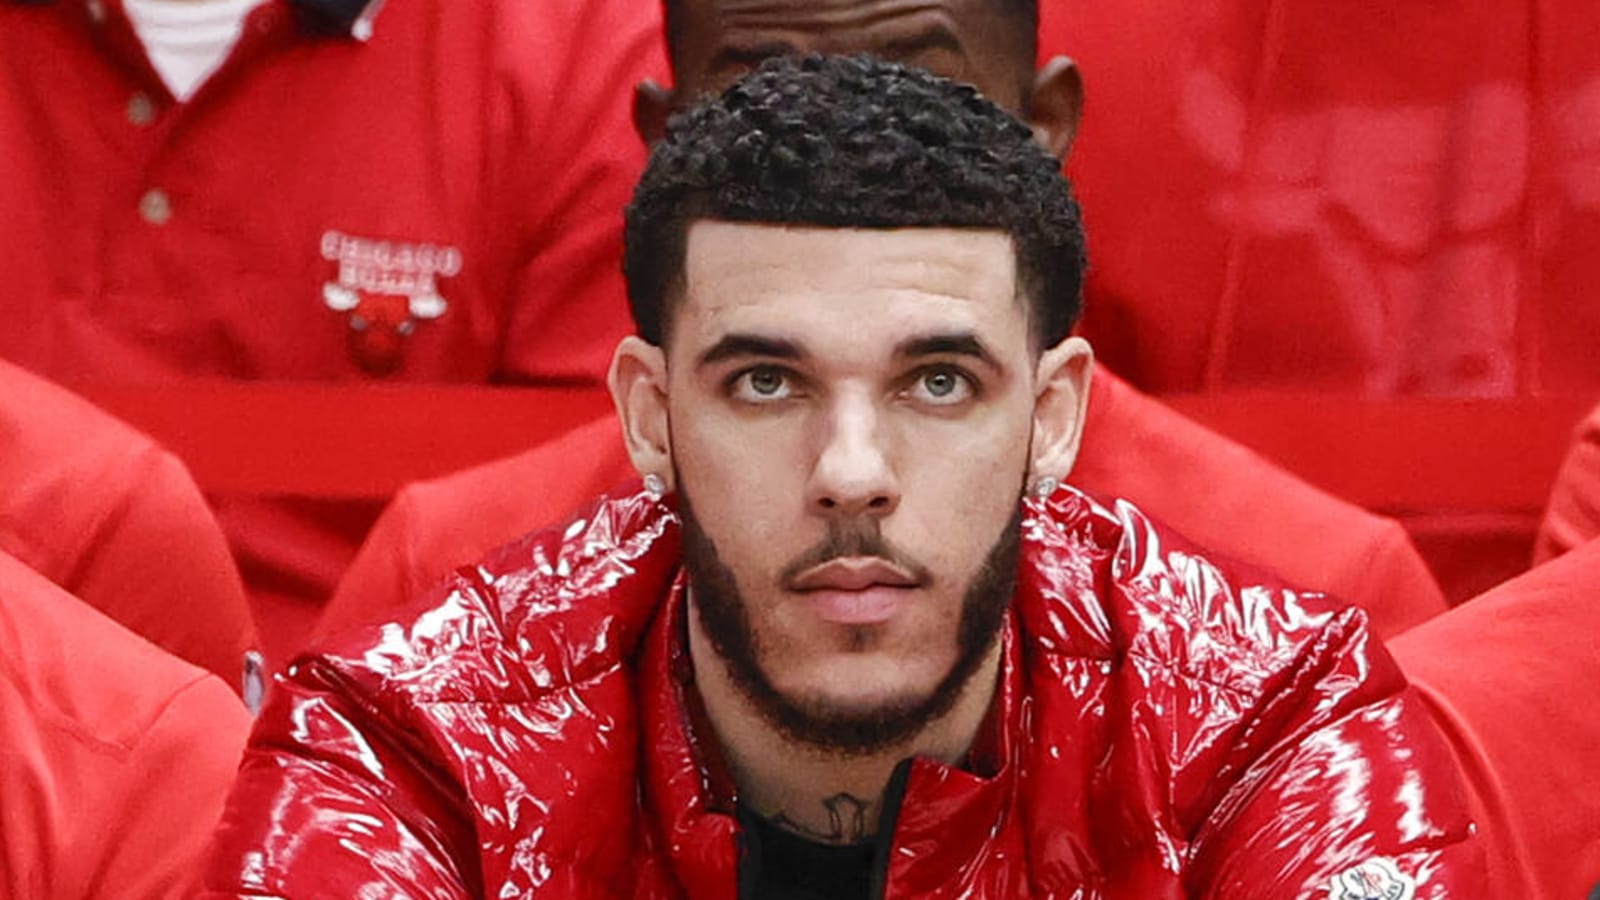 Bulls' Lonzo Ball out indefinitely after having knee surgery